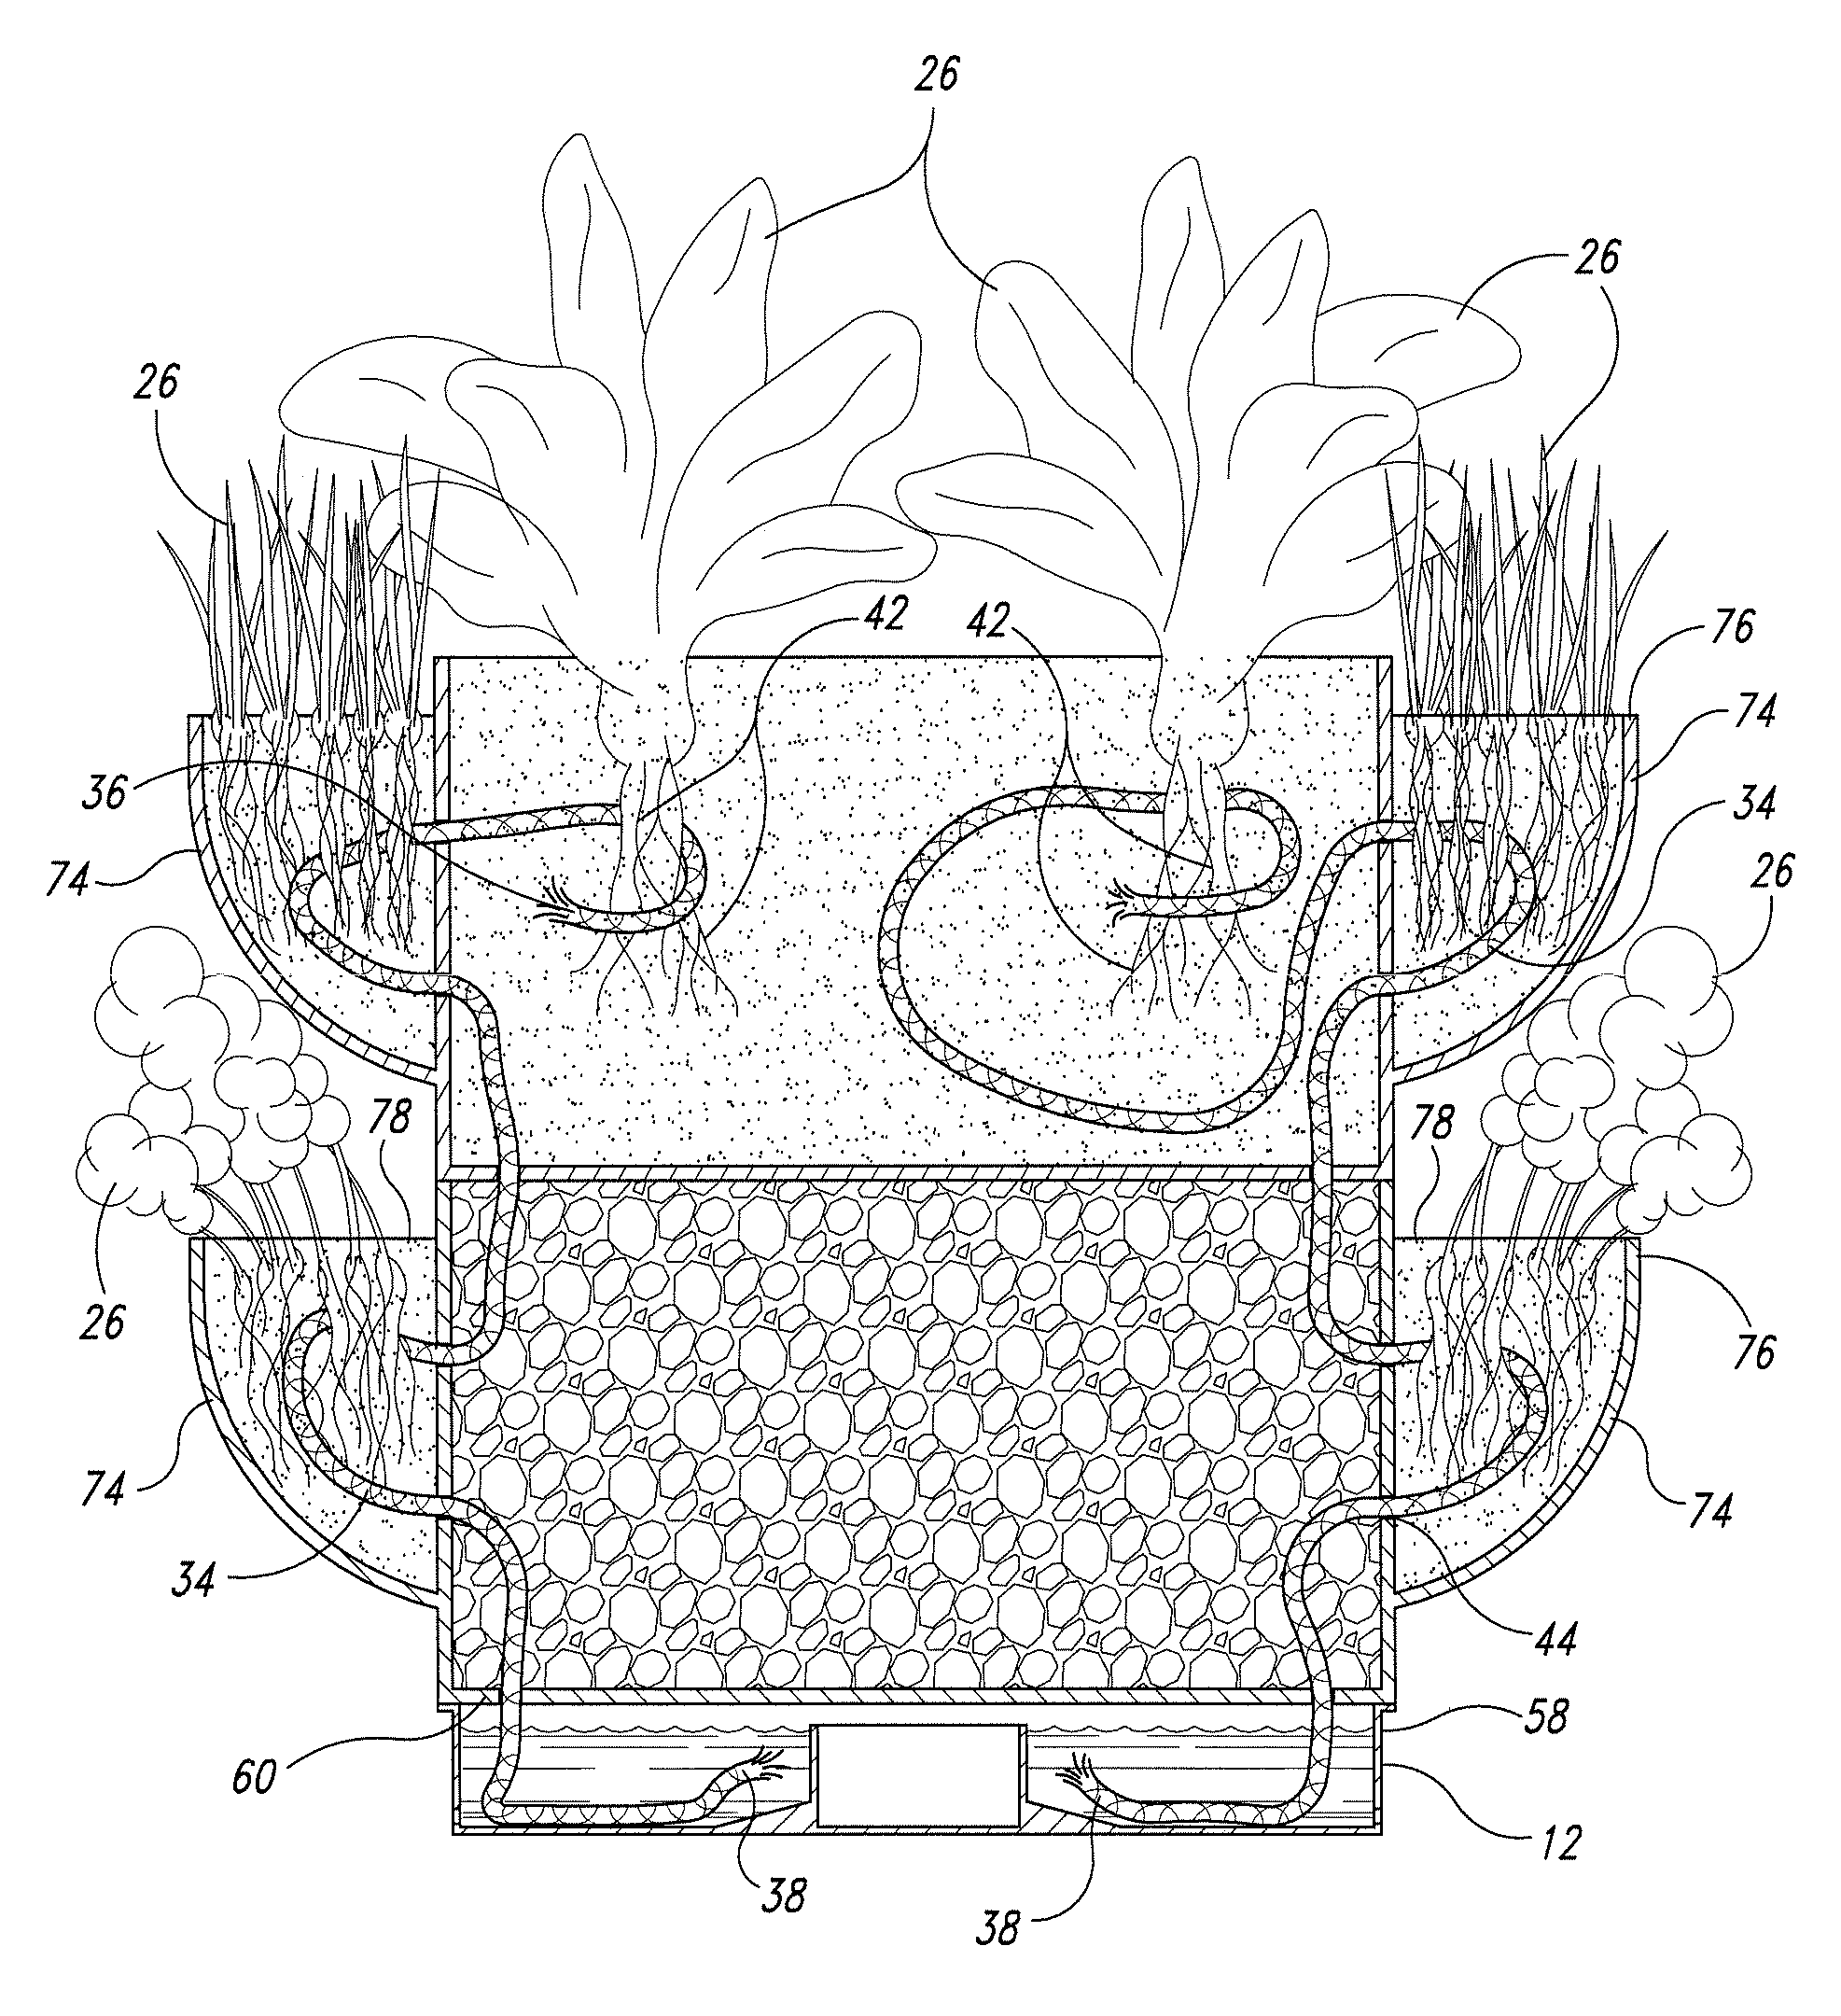 Eco-friendly vertical planter apparatus, system, and method